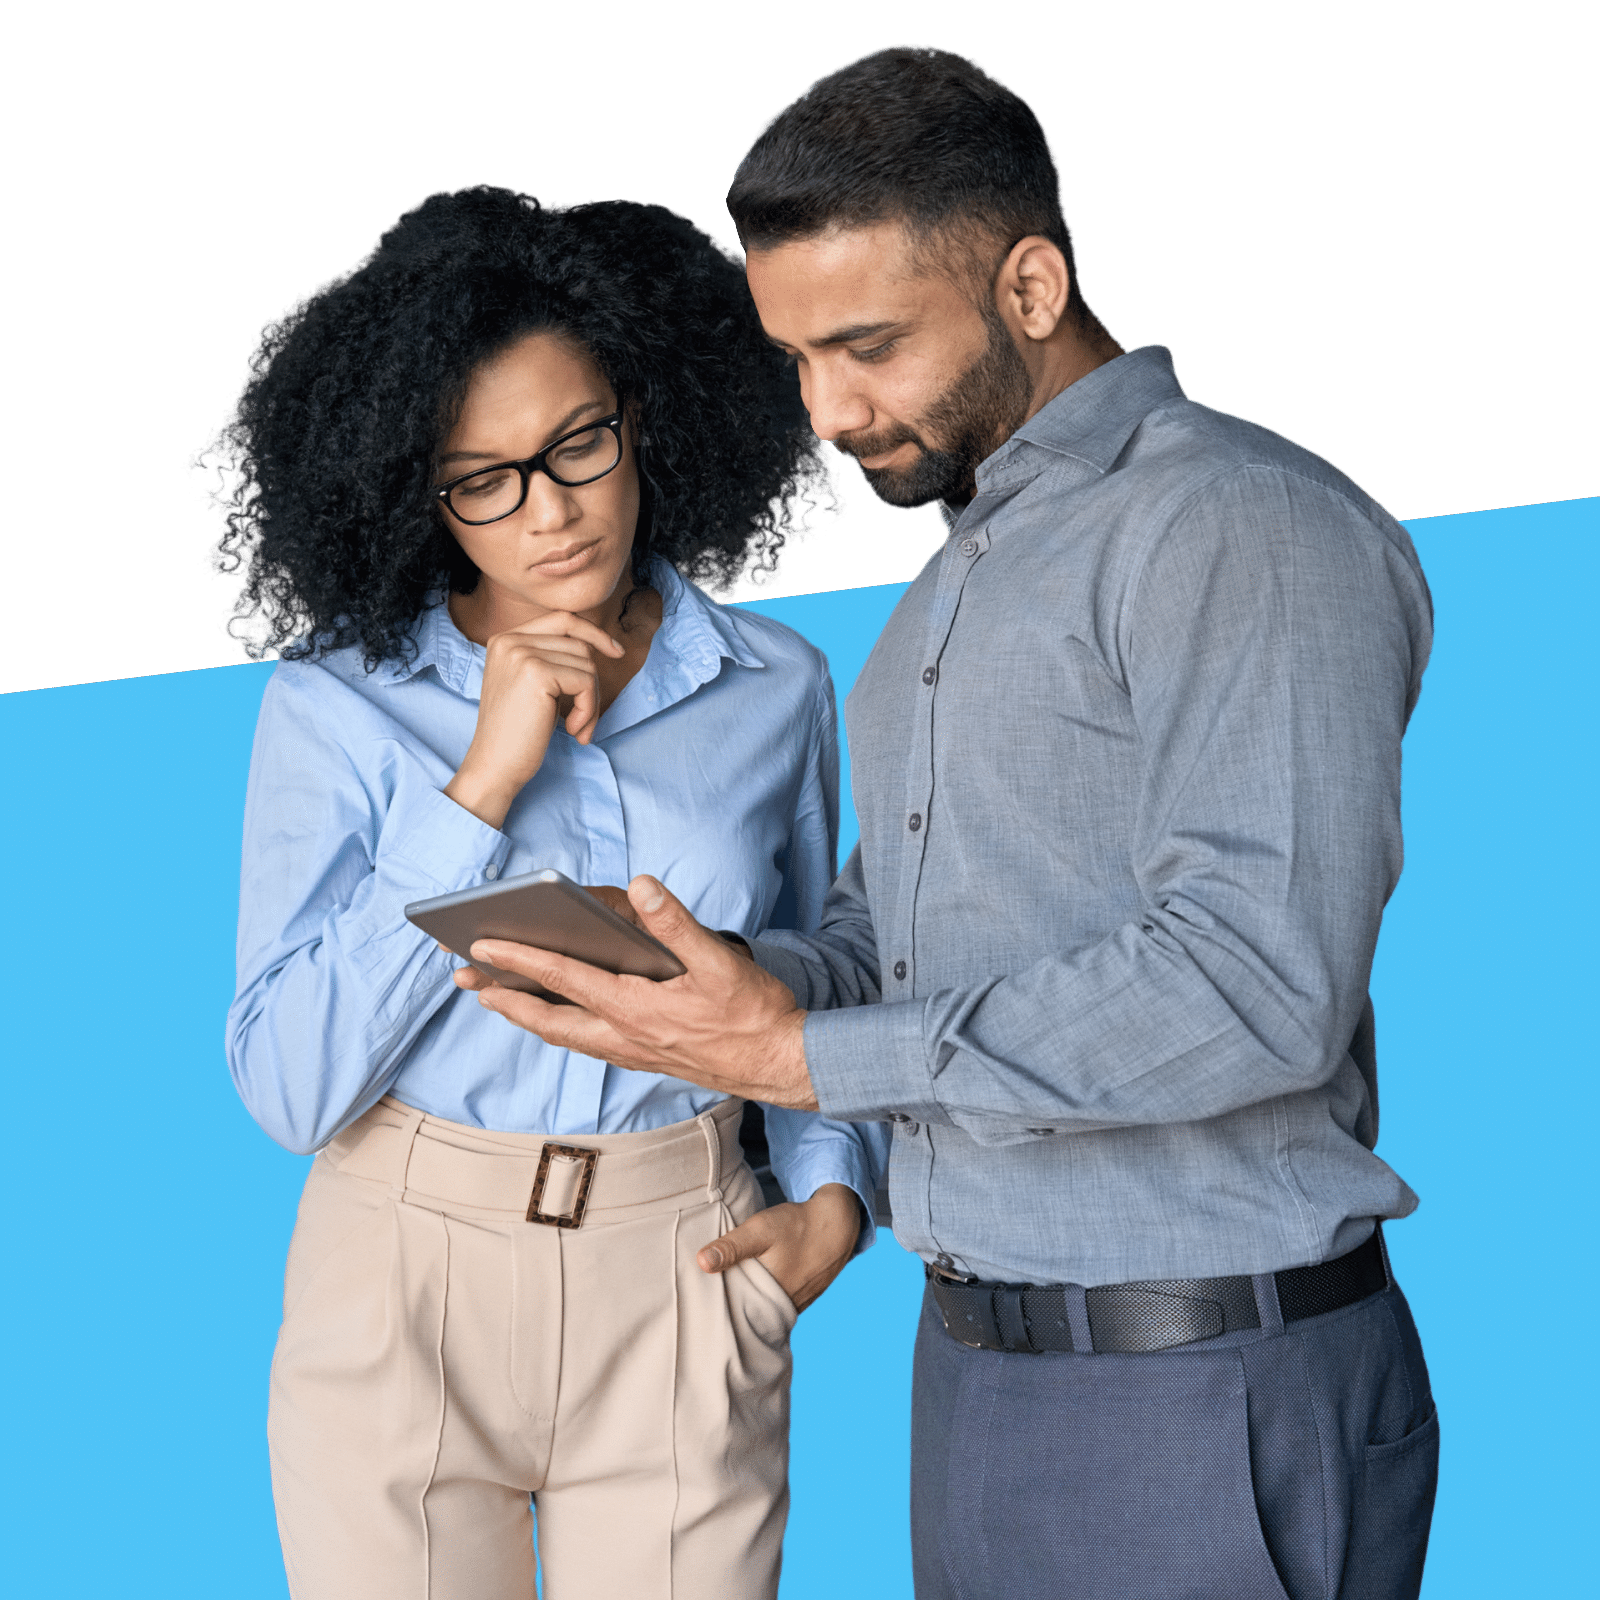 woman with glasses looking at tablet held by man together